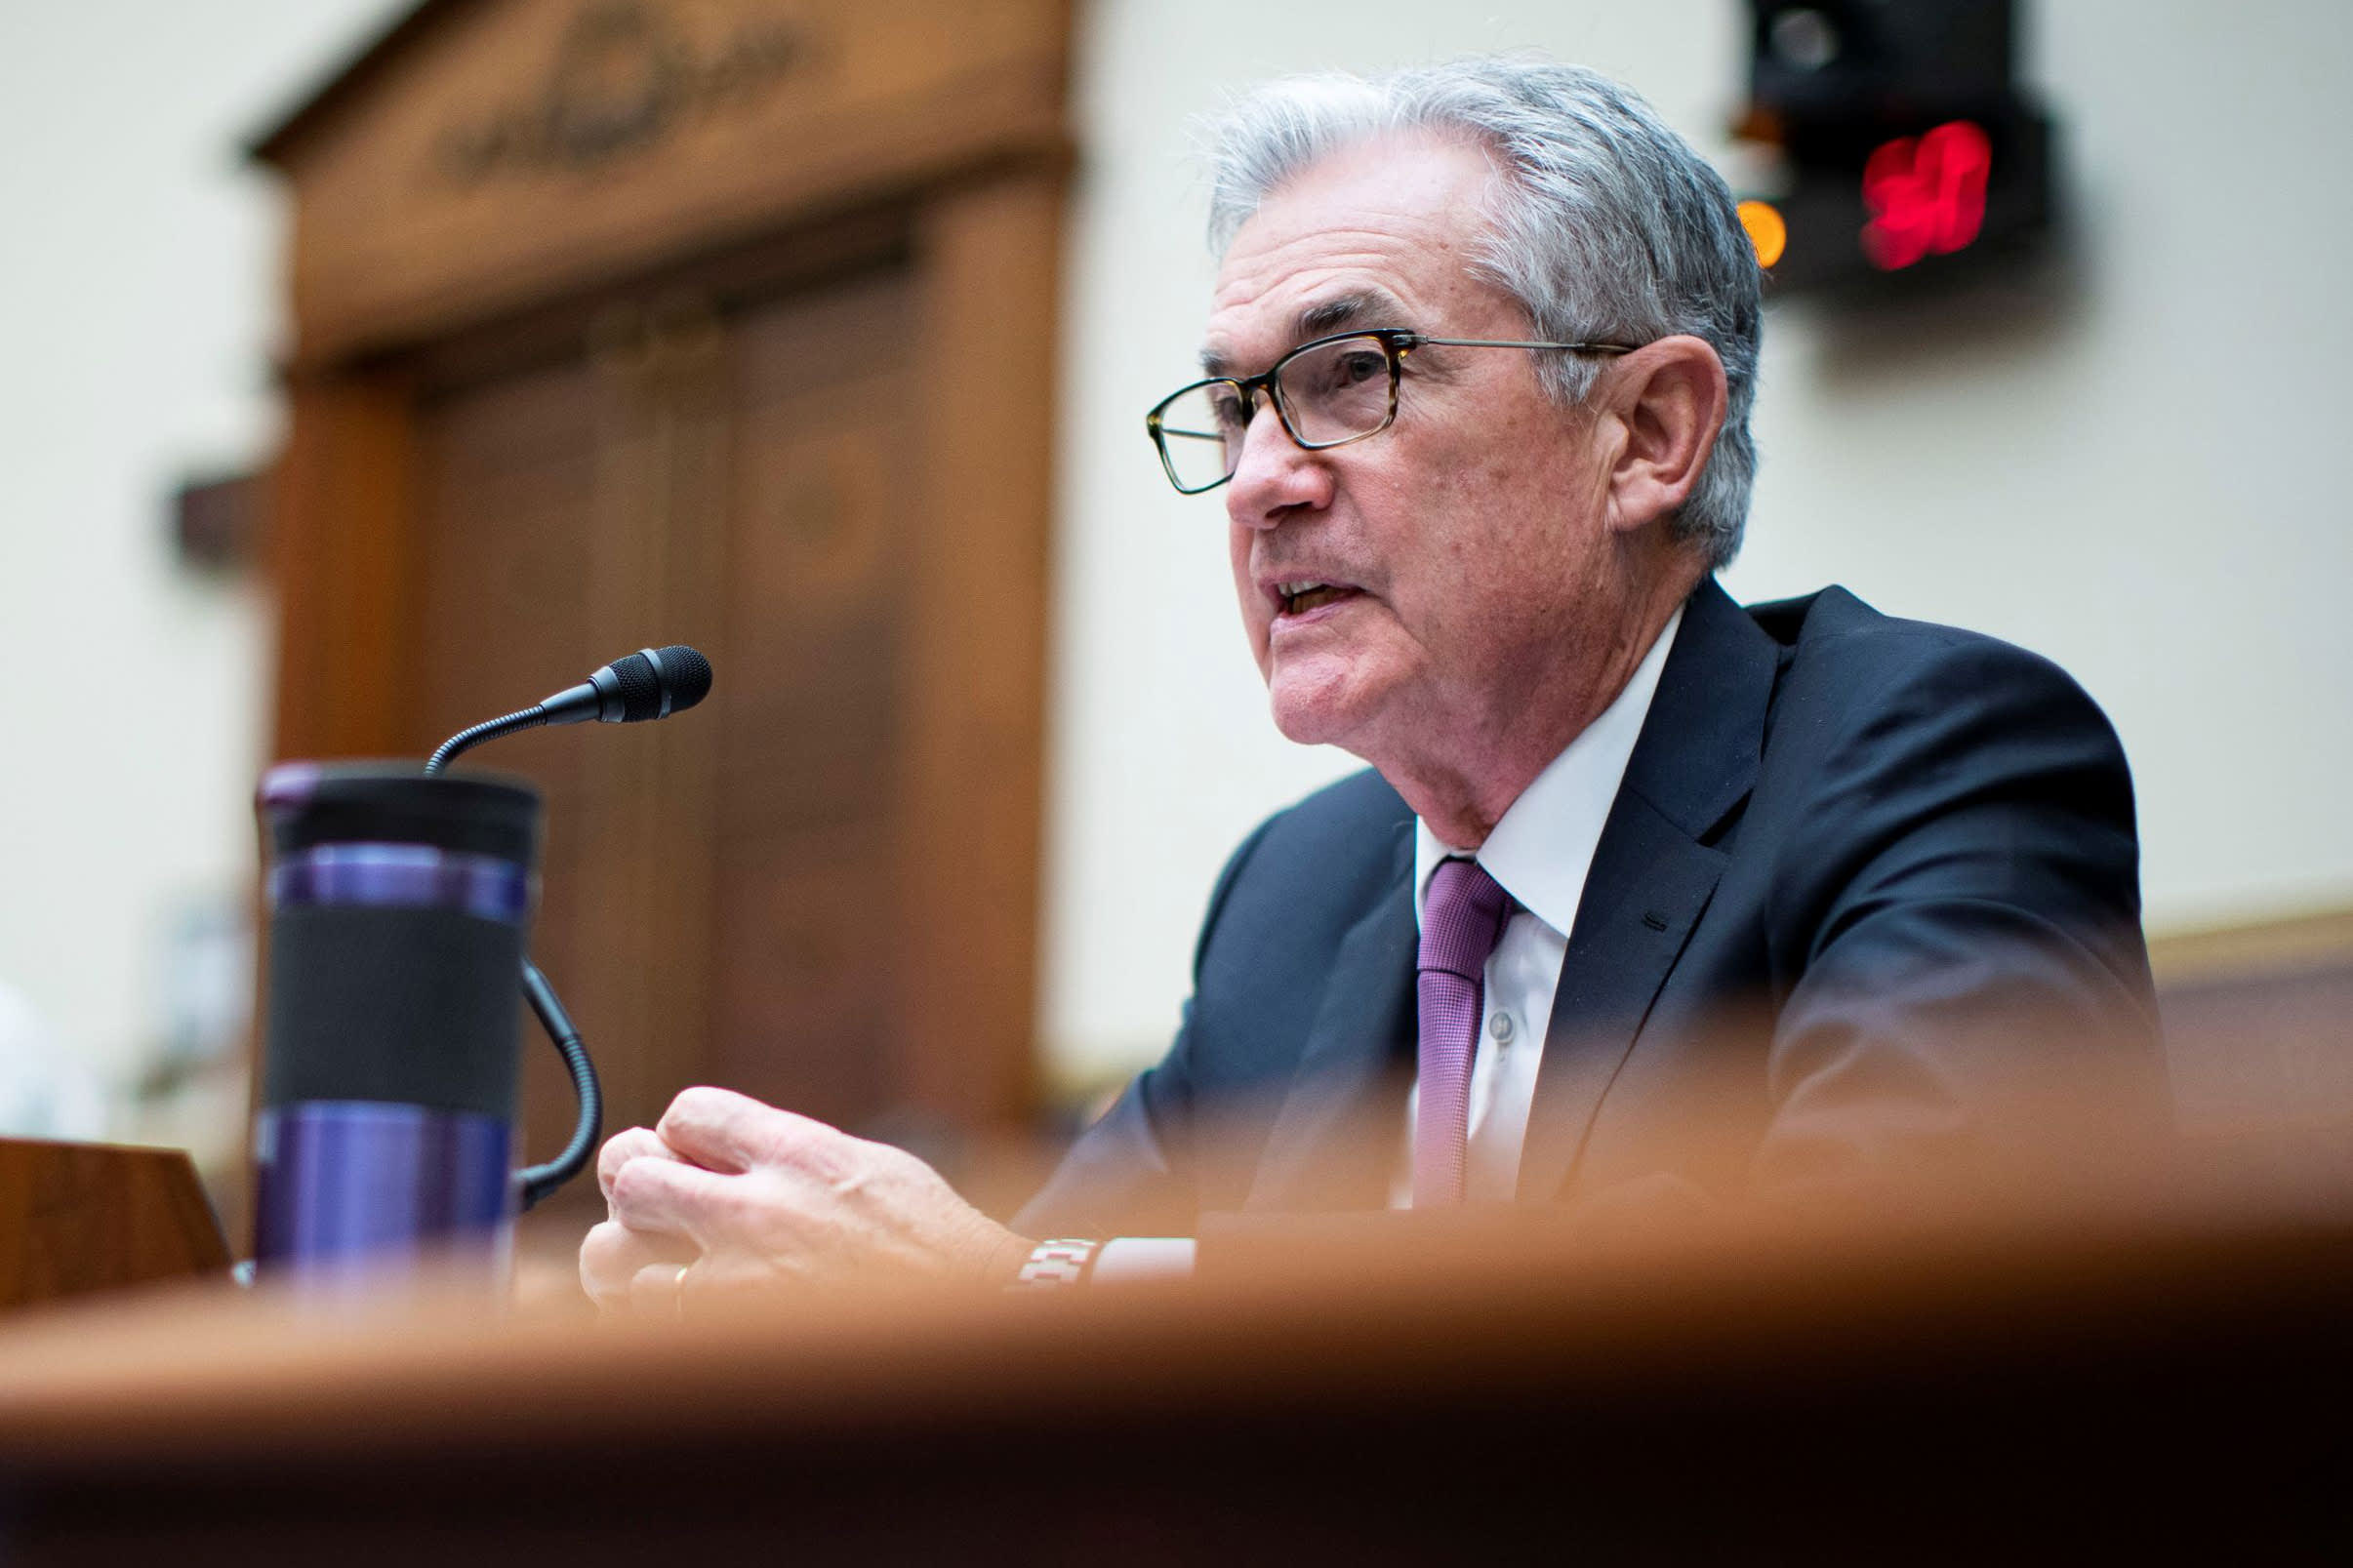 The Fed is ready to raise interest rates if inflation continues to rise, minutes show